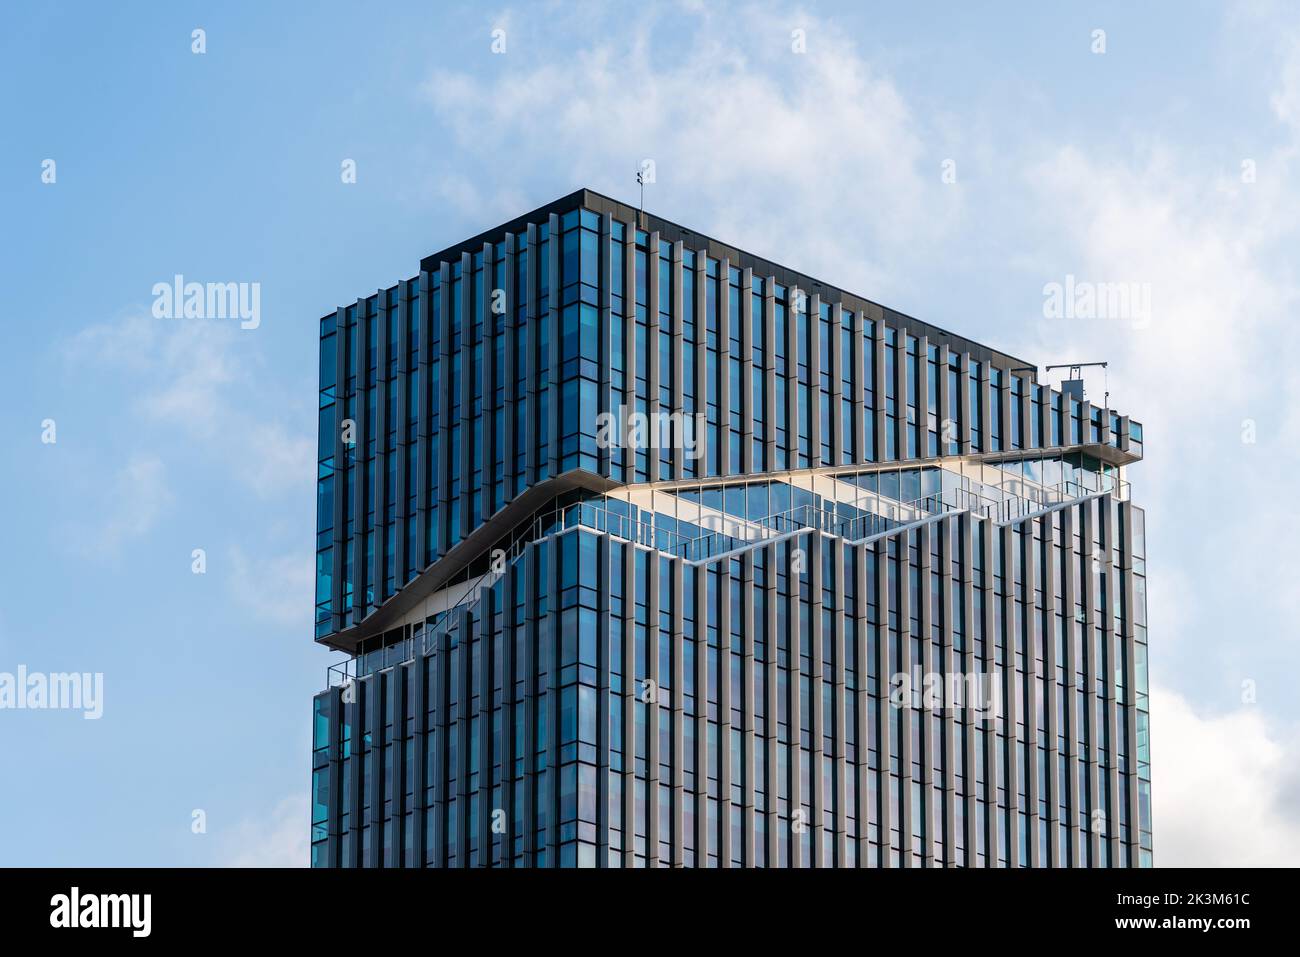 Amsterdam, Netherlands - May 7, 2022: Low angle view of futuristic architecture skyscraper against sky. Contemporary architecture, blue colors. Low an Stock Photo